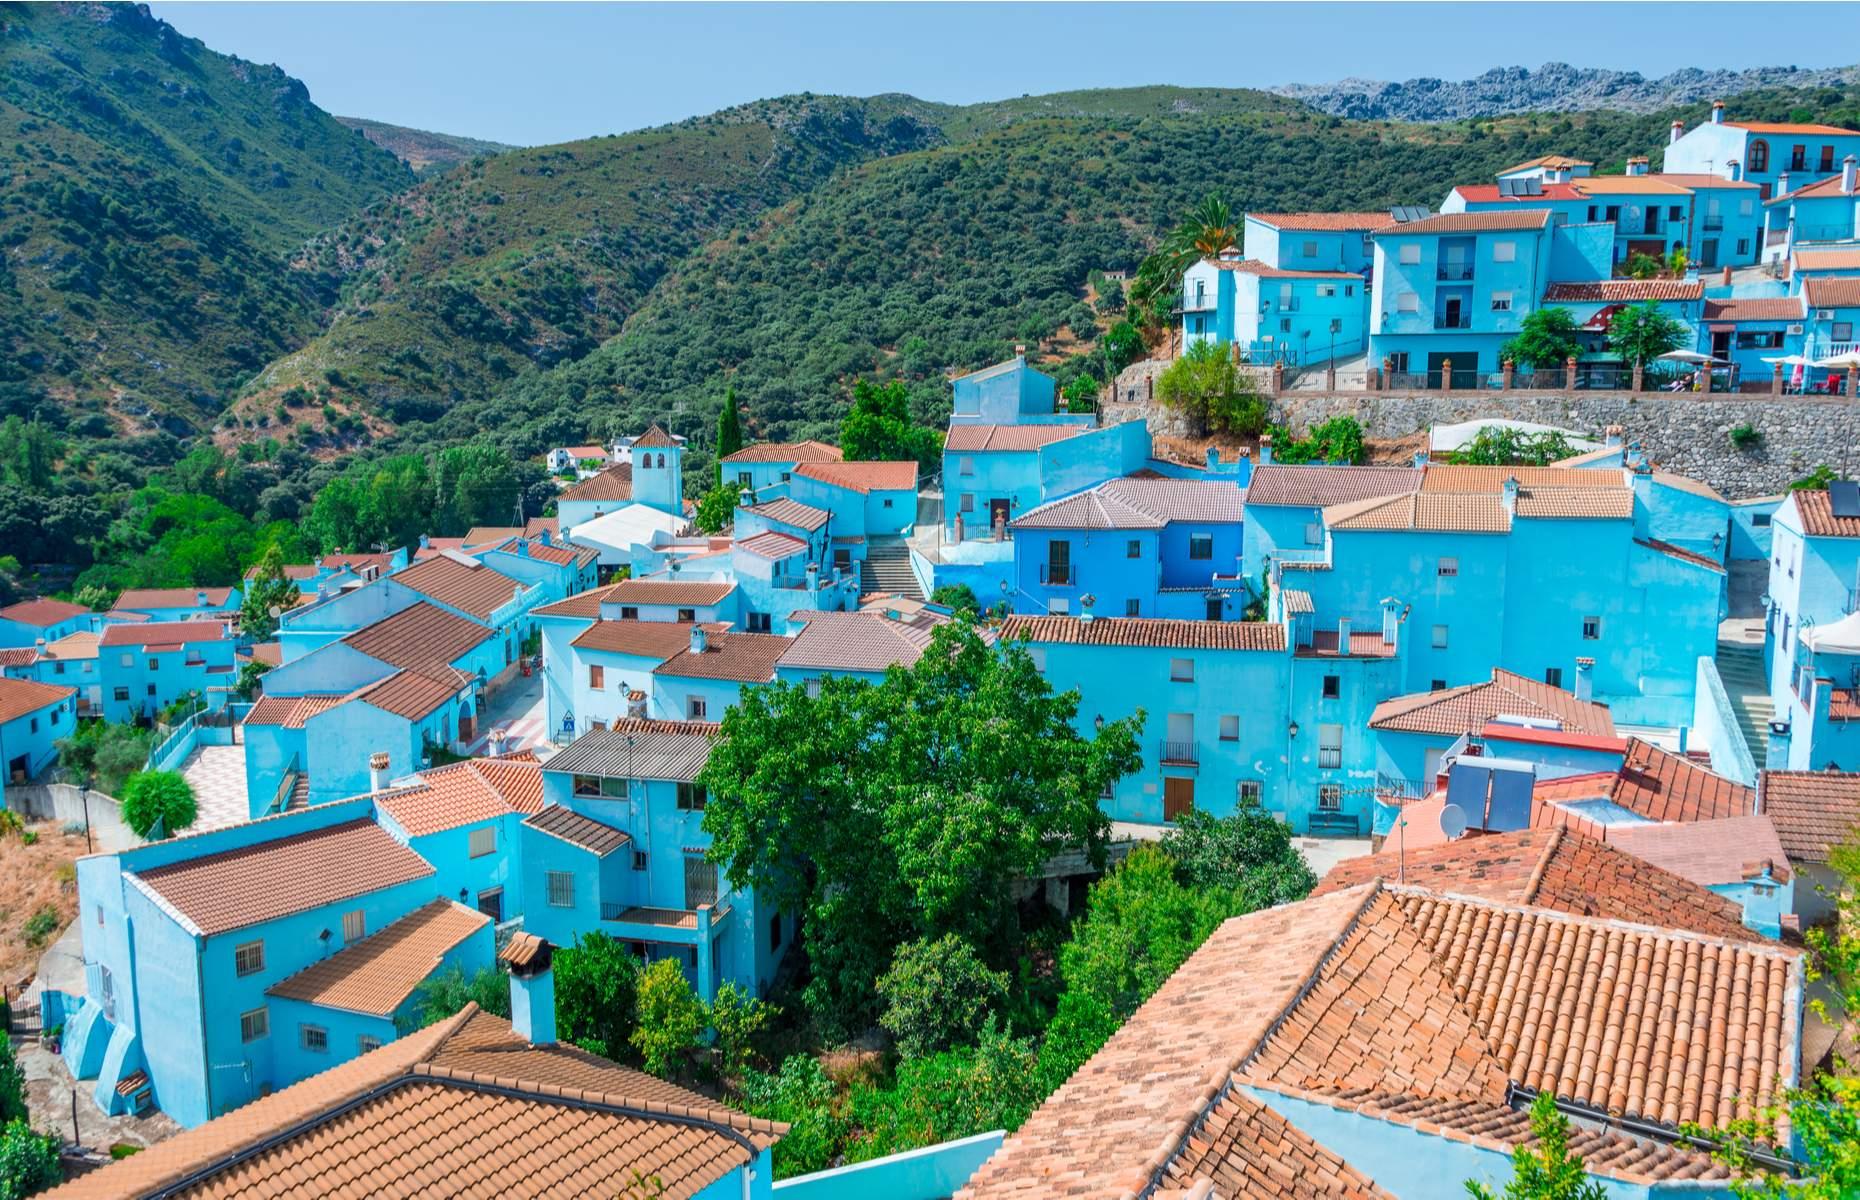 <p>There’s a fascinating story behind Júzcar’s bright blue buildings. In 2011, residents of the Andalusian village were approached by Sony Pictures, who requested to paint its whitewashed houses blue as a marketing ploy for <em>The Smurfs</em> movie. After some initial concerns, they agreed and the entire place was turned Smurf-blue. However, the following year, when Sony attempted to revert the village to its original white, locals refused as the Smurf connection had led to an explosion in tourism. </p>